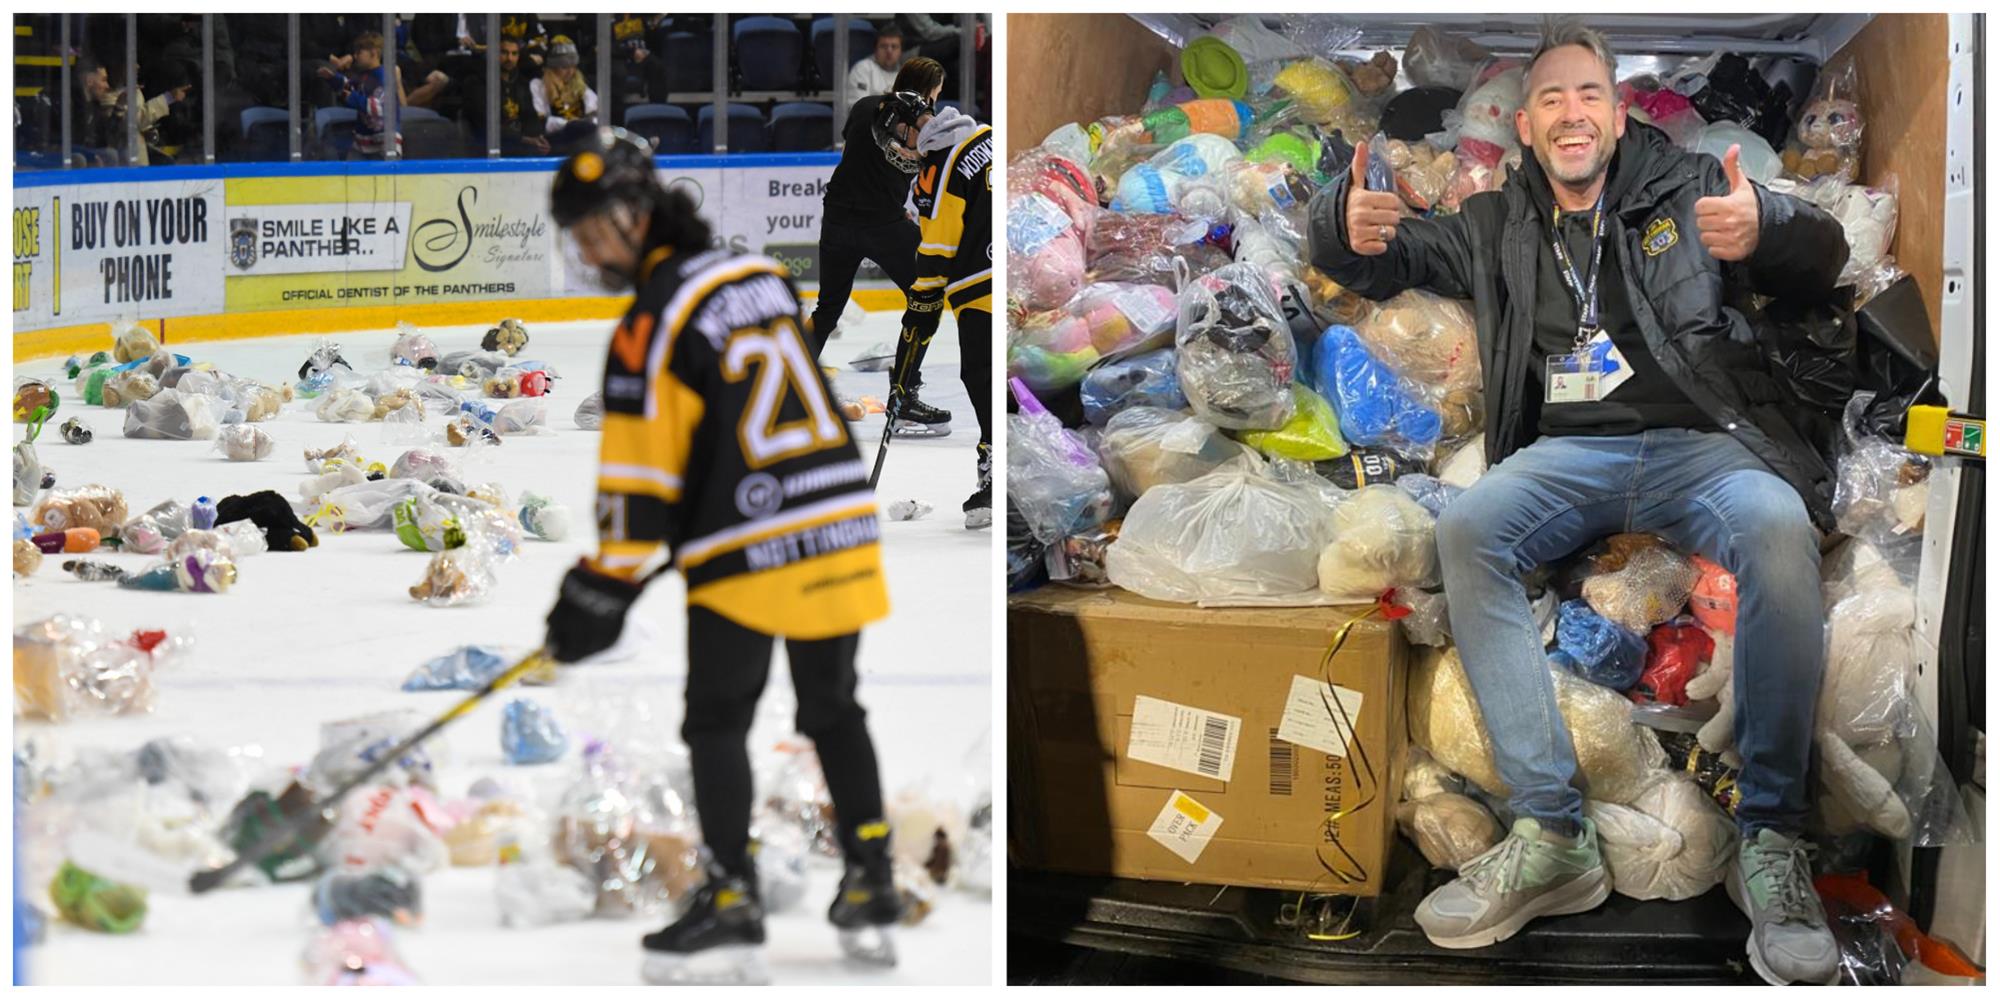 THANK YOU FOR YOUR AMAZING TEDDY BEAR TOSS SUPPORT Top Image